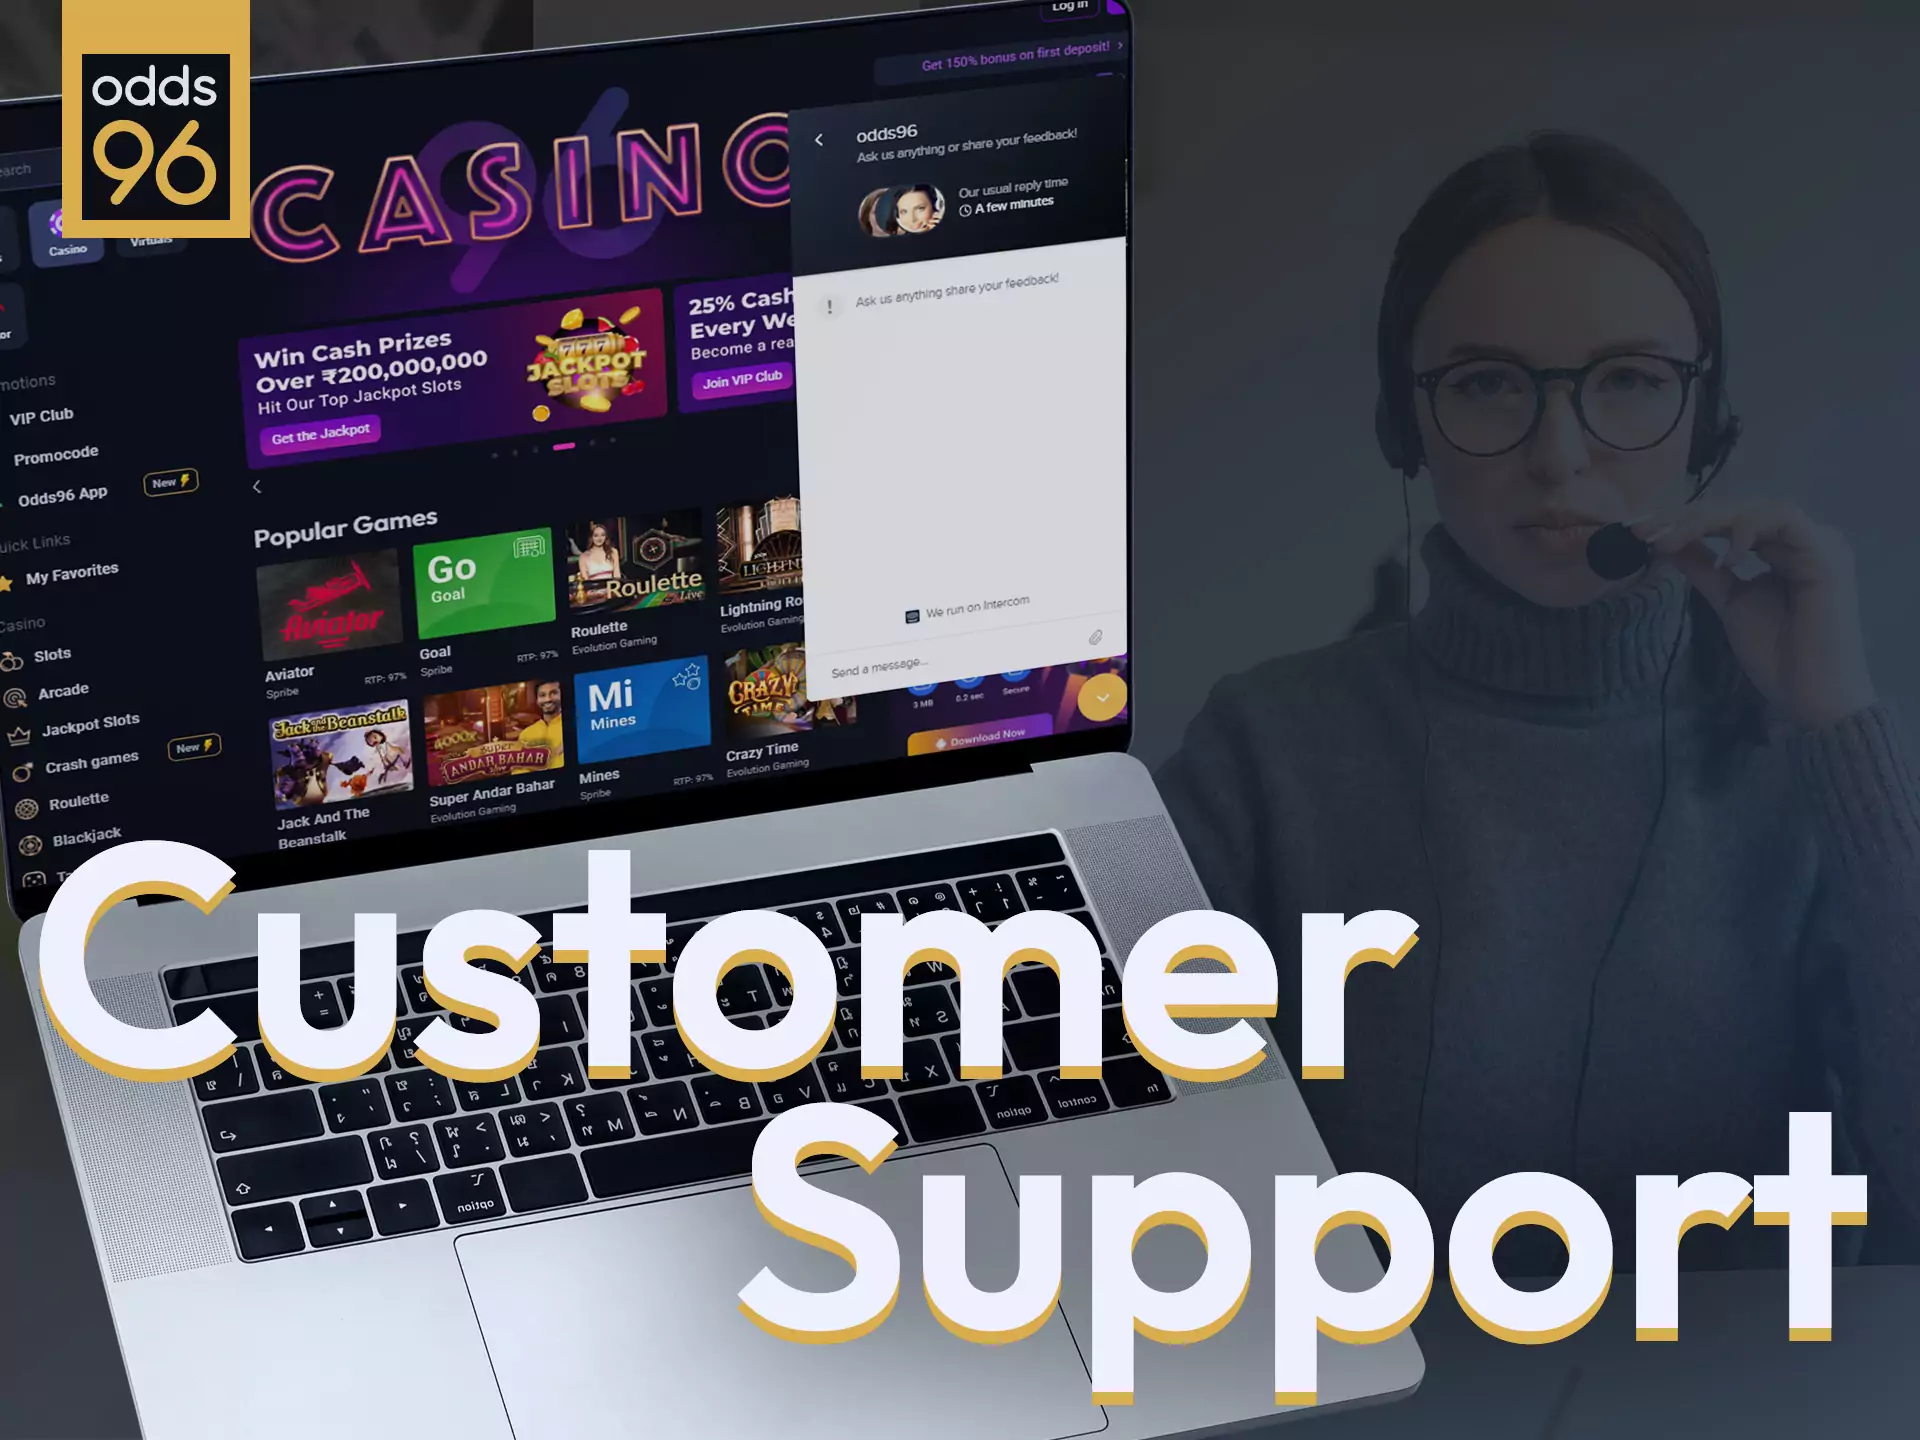 Odds96 customer support is ready to answer your questions and help at any time.